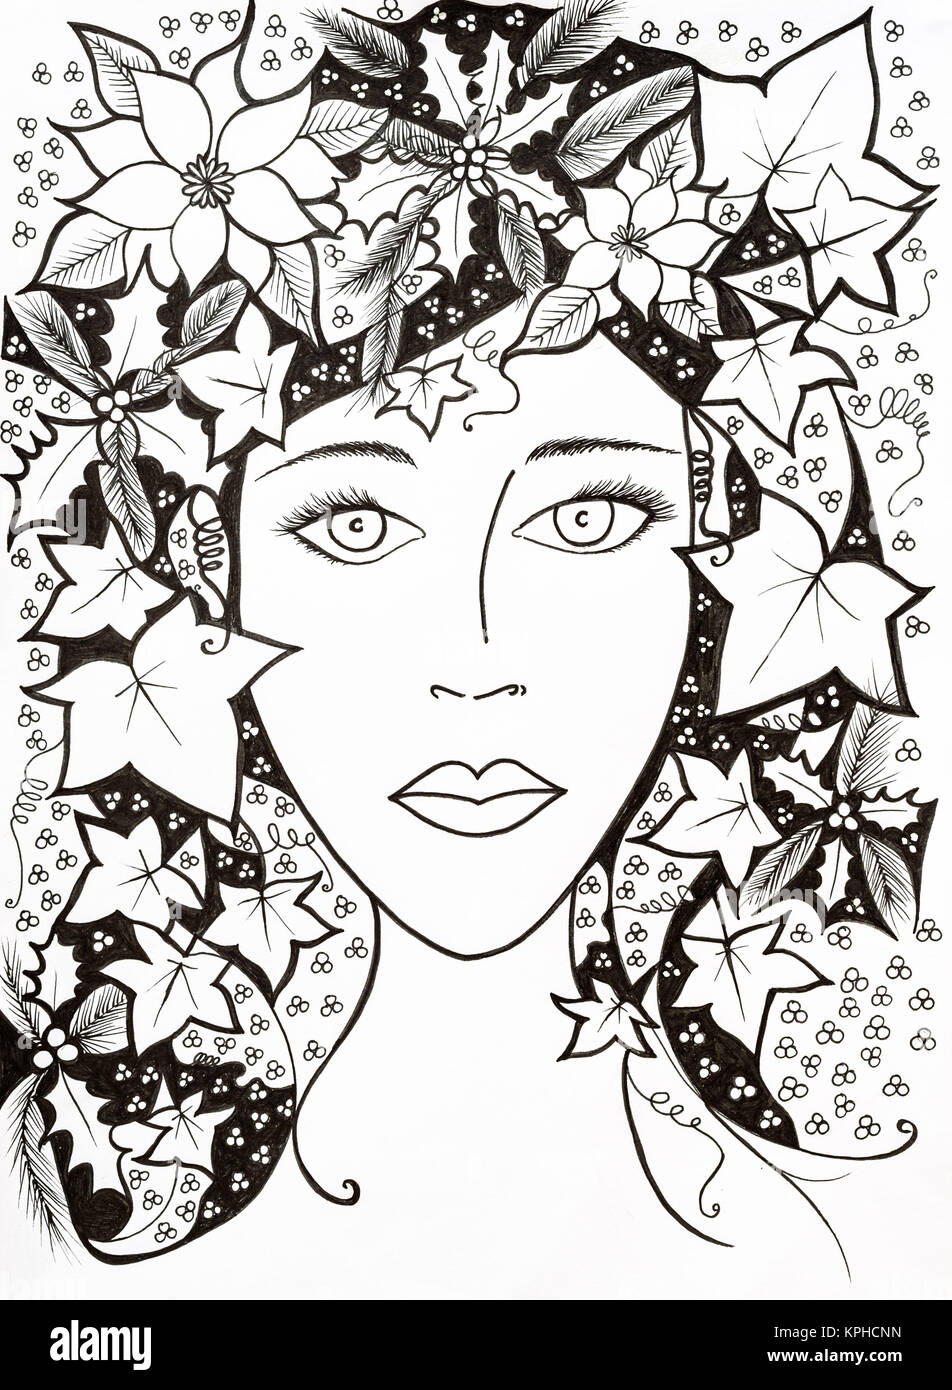 Hand drawn ink Illustration of a young femaile face with Winter seasonal hair decoration. Stock Photo